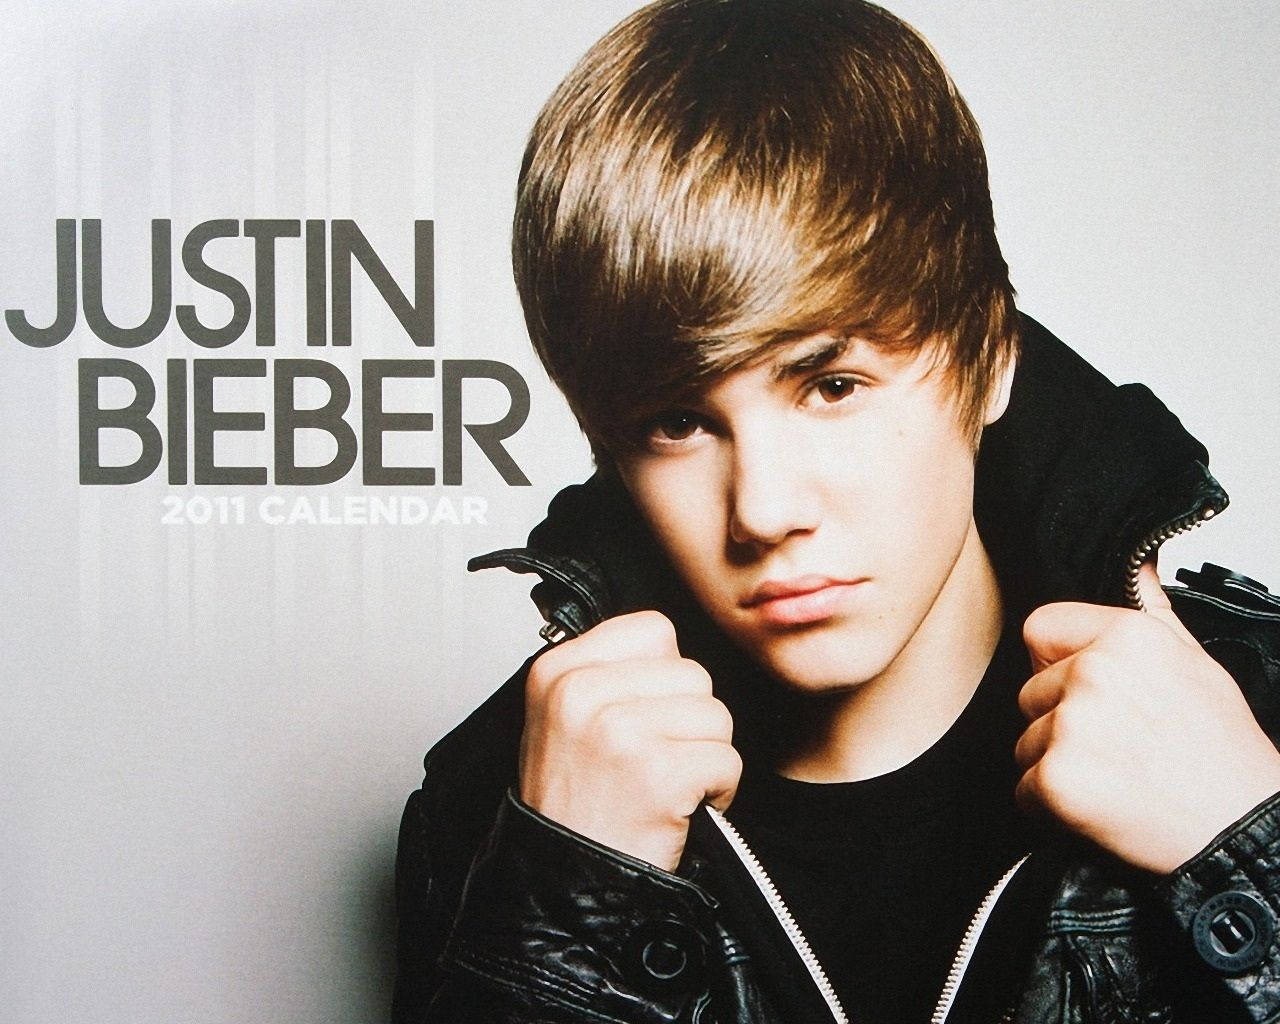 Justin Bieber Looking Casual And Cool For The 2011 Calendar Cover Background